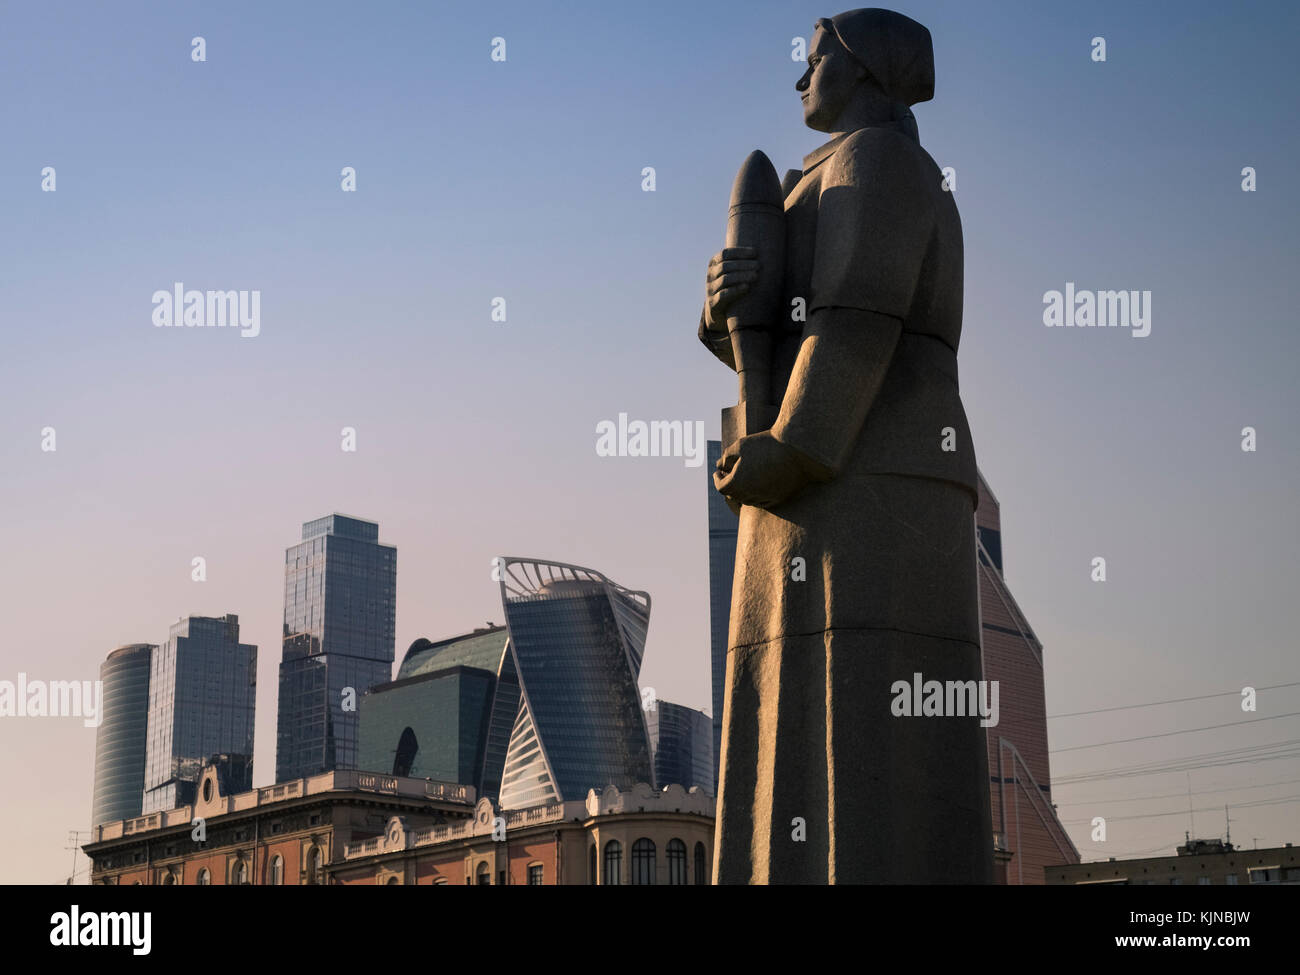 A soviet WW2 monument in Dorogomilovo District, with modern International Business Centre skyscrapers in the background, Moscow, Russia. Stock Photo